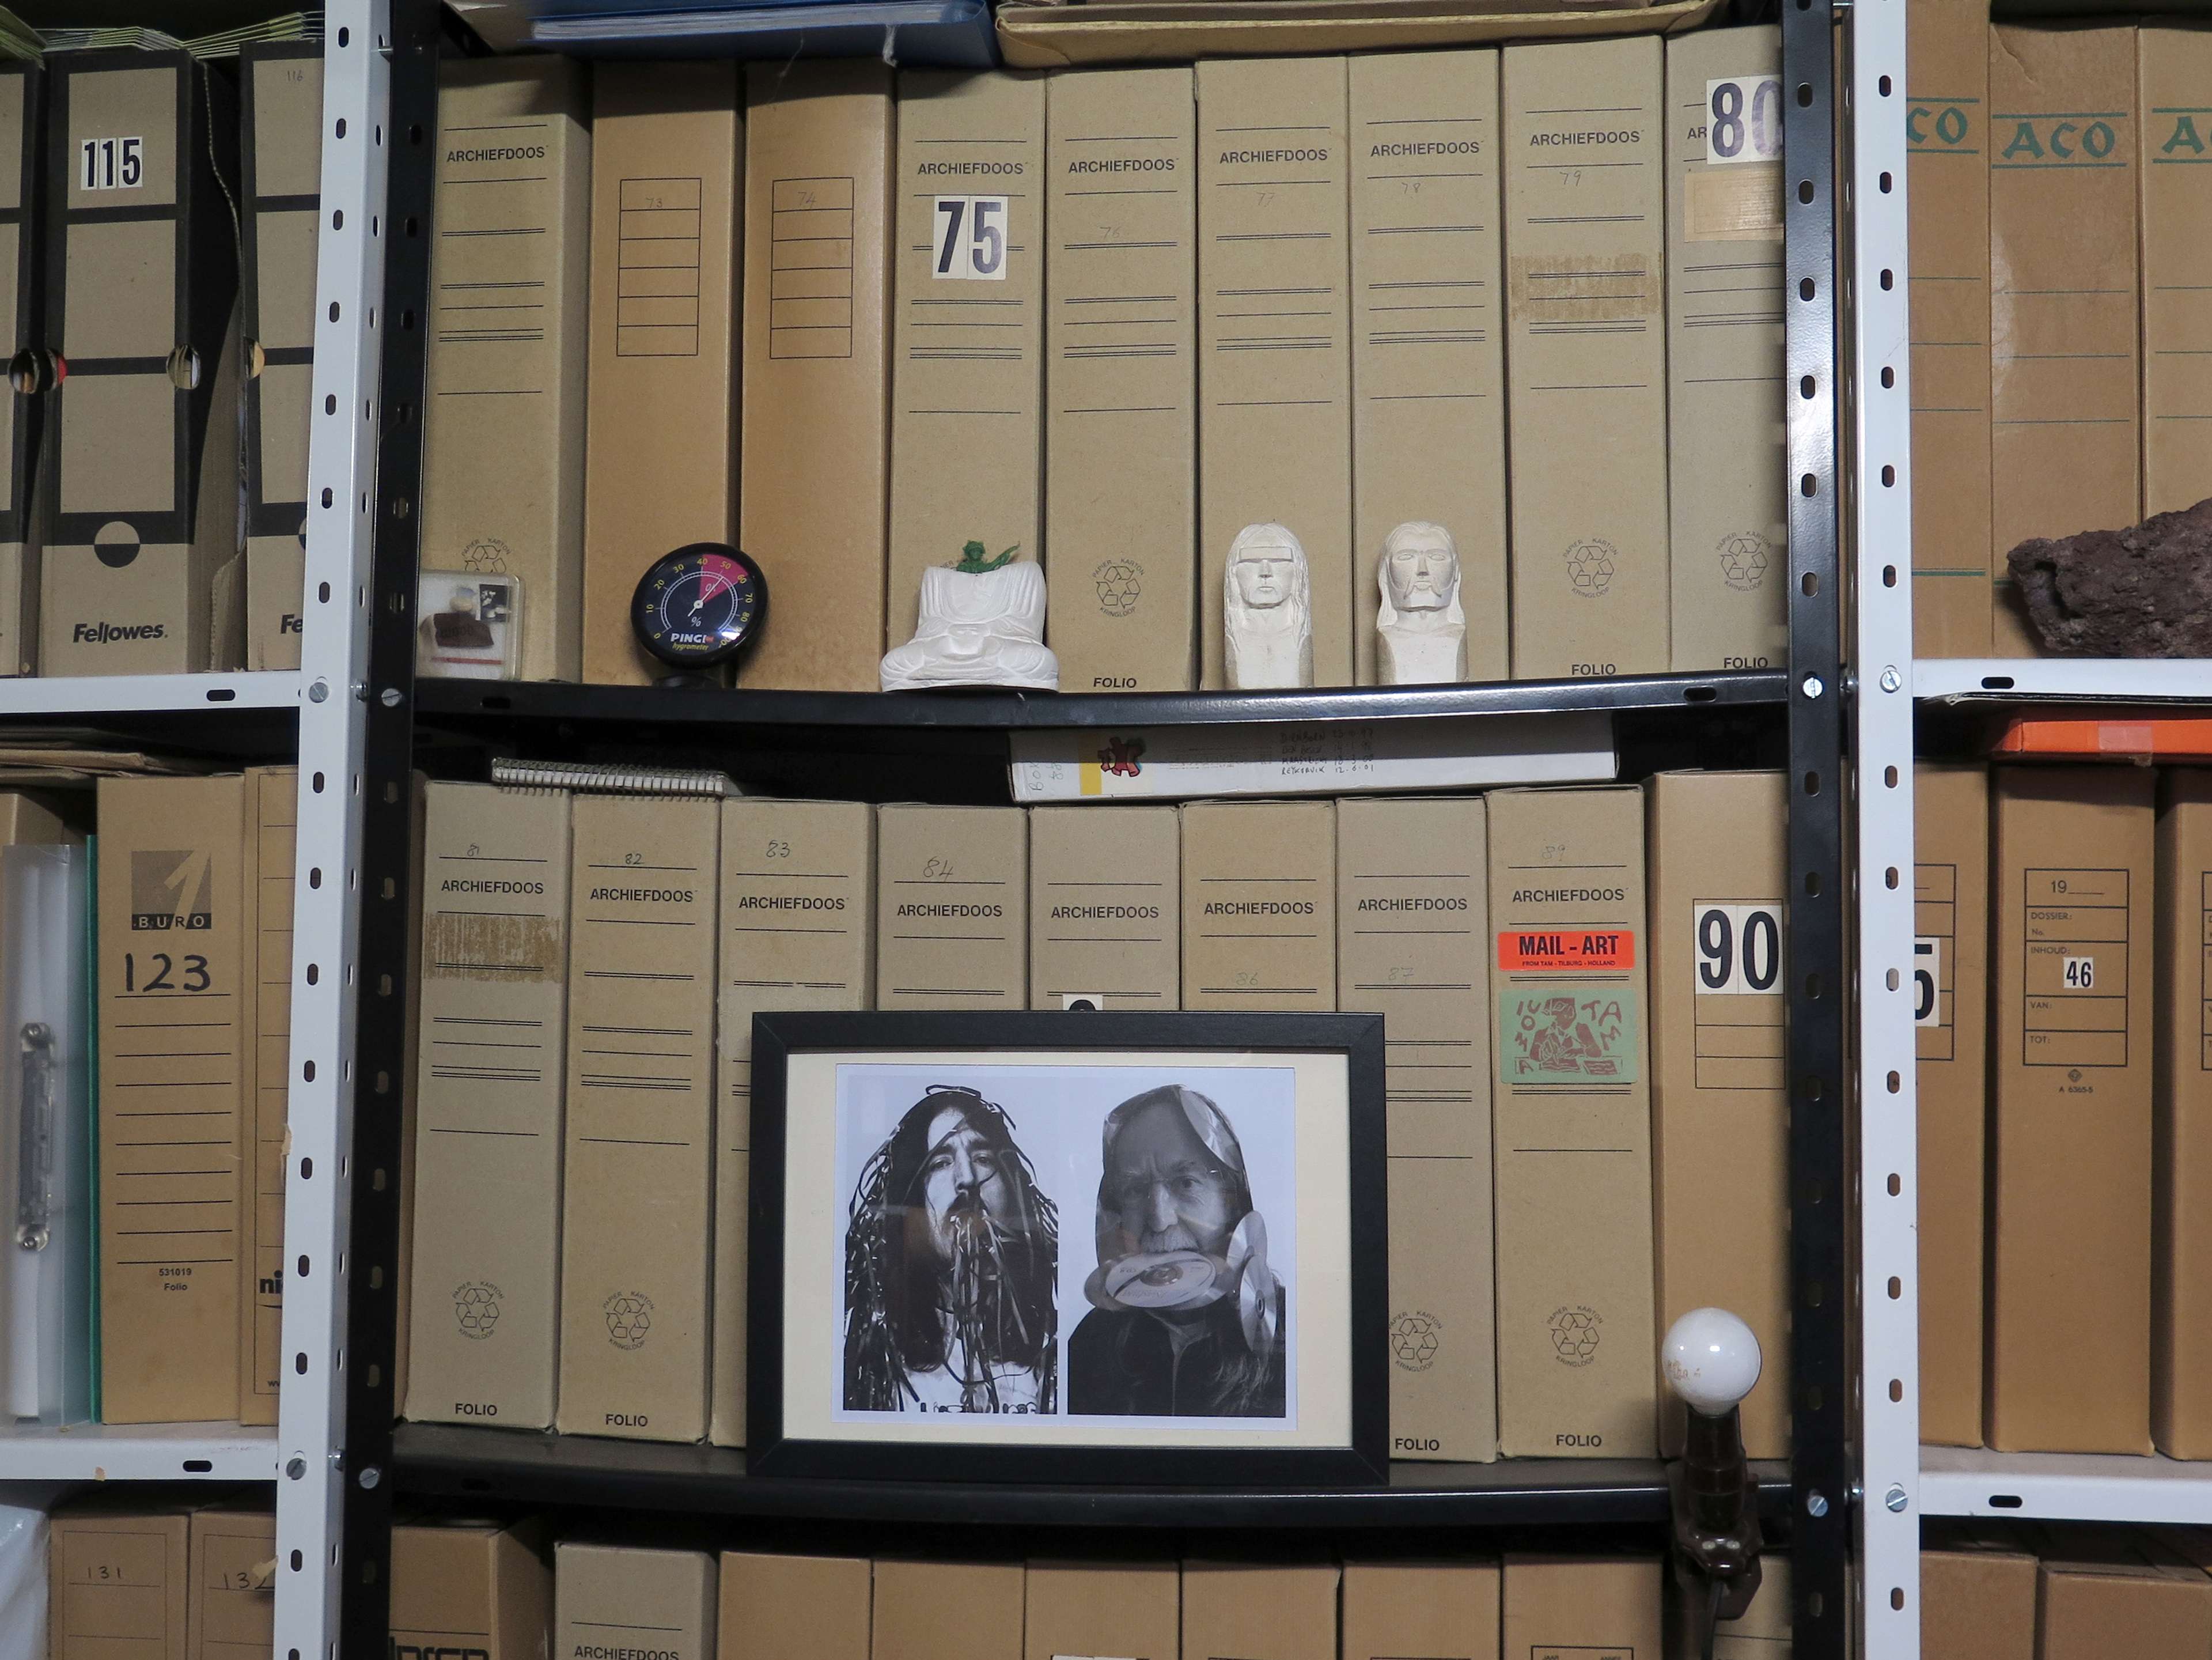 The VEC archives of Rod Summers An exhibition curated by Joep Vossebeld, Rod Summers and Martin La Roche

Bonnefanten Museum, Maastricht.